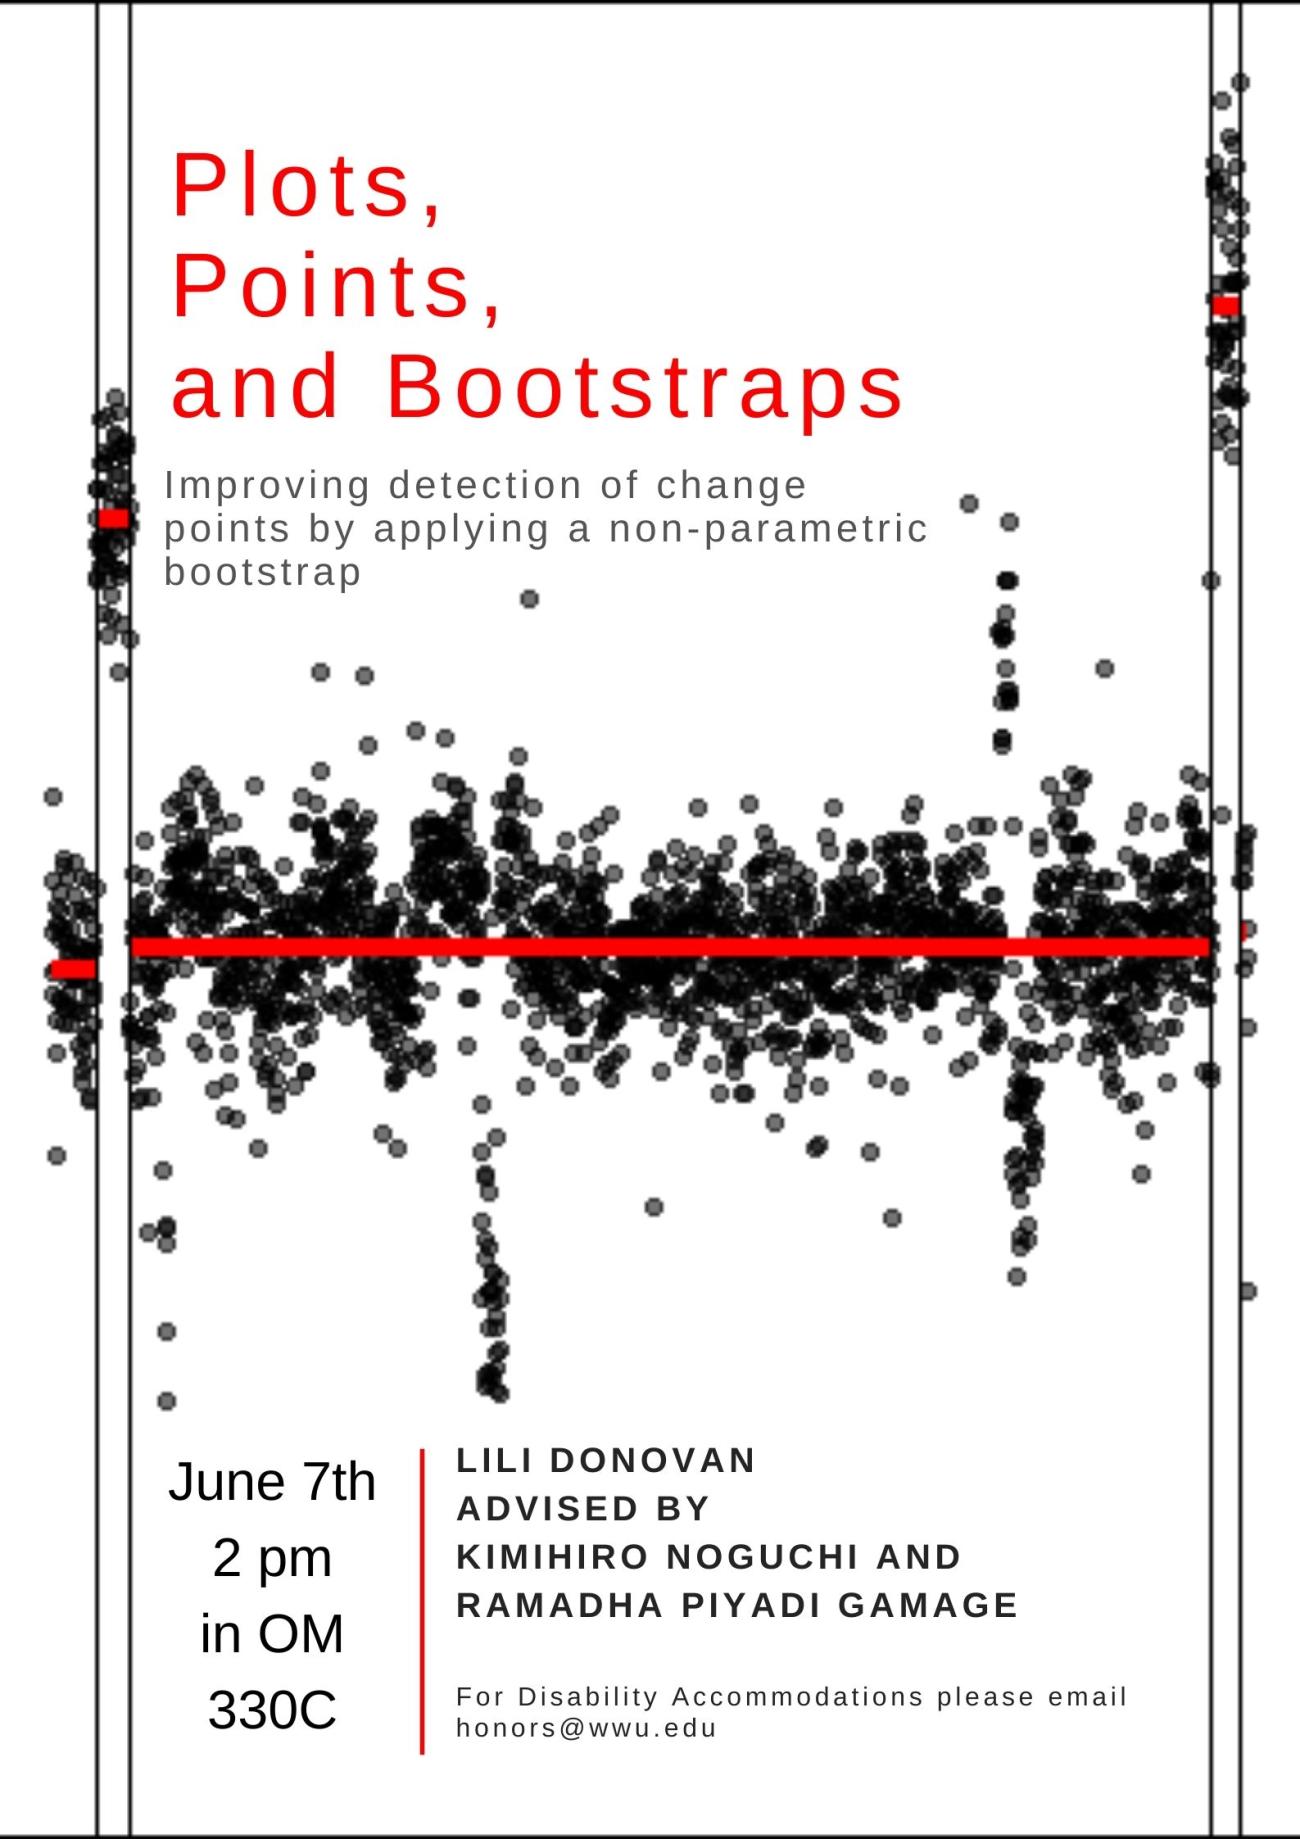 White background with a plot consisting of black and grey dots and a horizontal red line. The text reads "Plots, Points, and Bootstraps. Improving detection of change points by applying a non-parametric bootstrap. Presented by Lili Donovan, advised by Kimihiro Noguchi and Ramadha Piyadi Gamage. June 7th at 2 pm in OM 330C. For Disability Accommodations please email honors@wwu.edu."